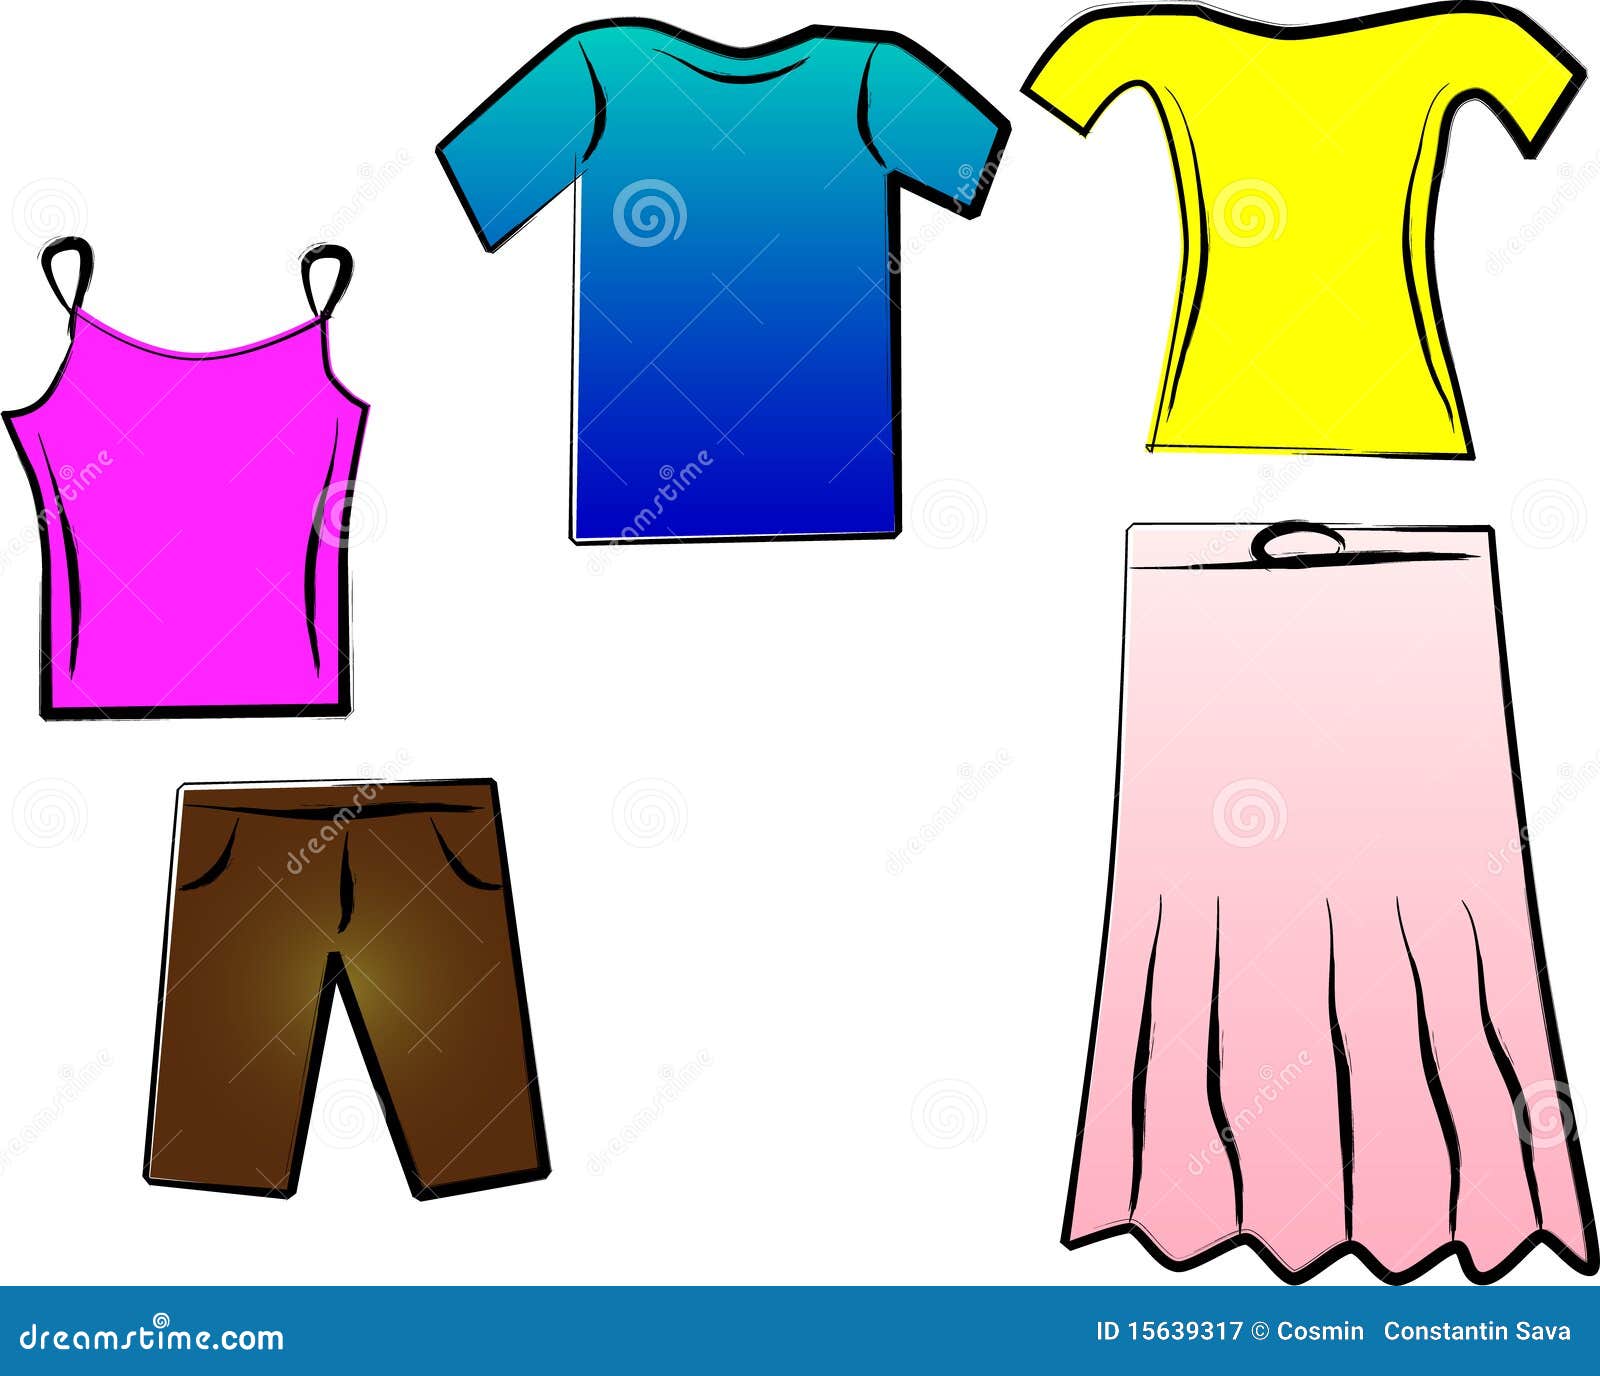 summer clothes clipart images - photo #21